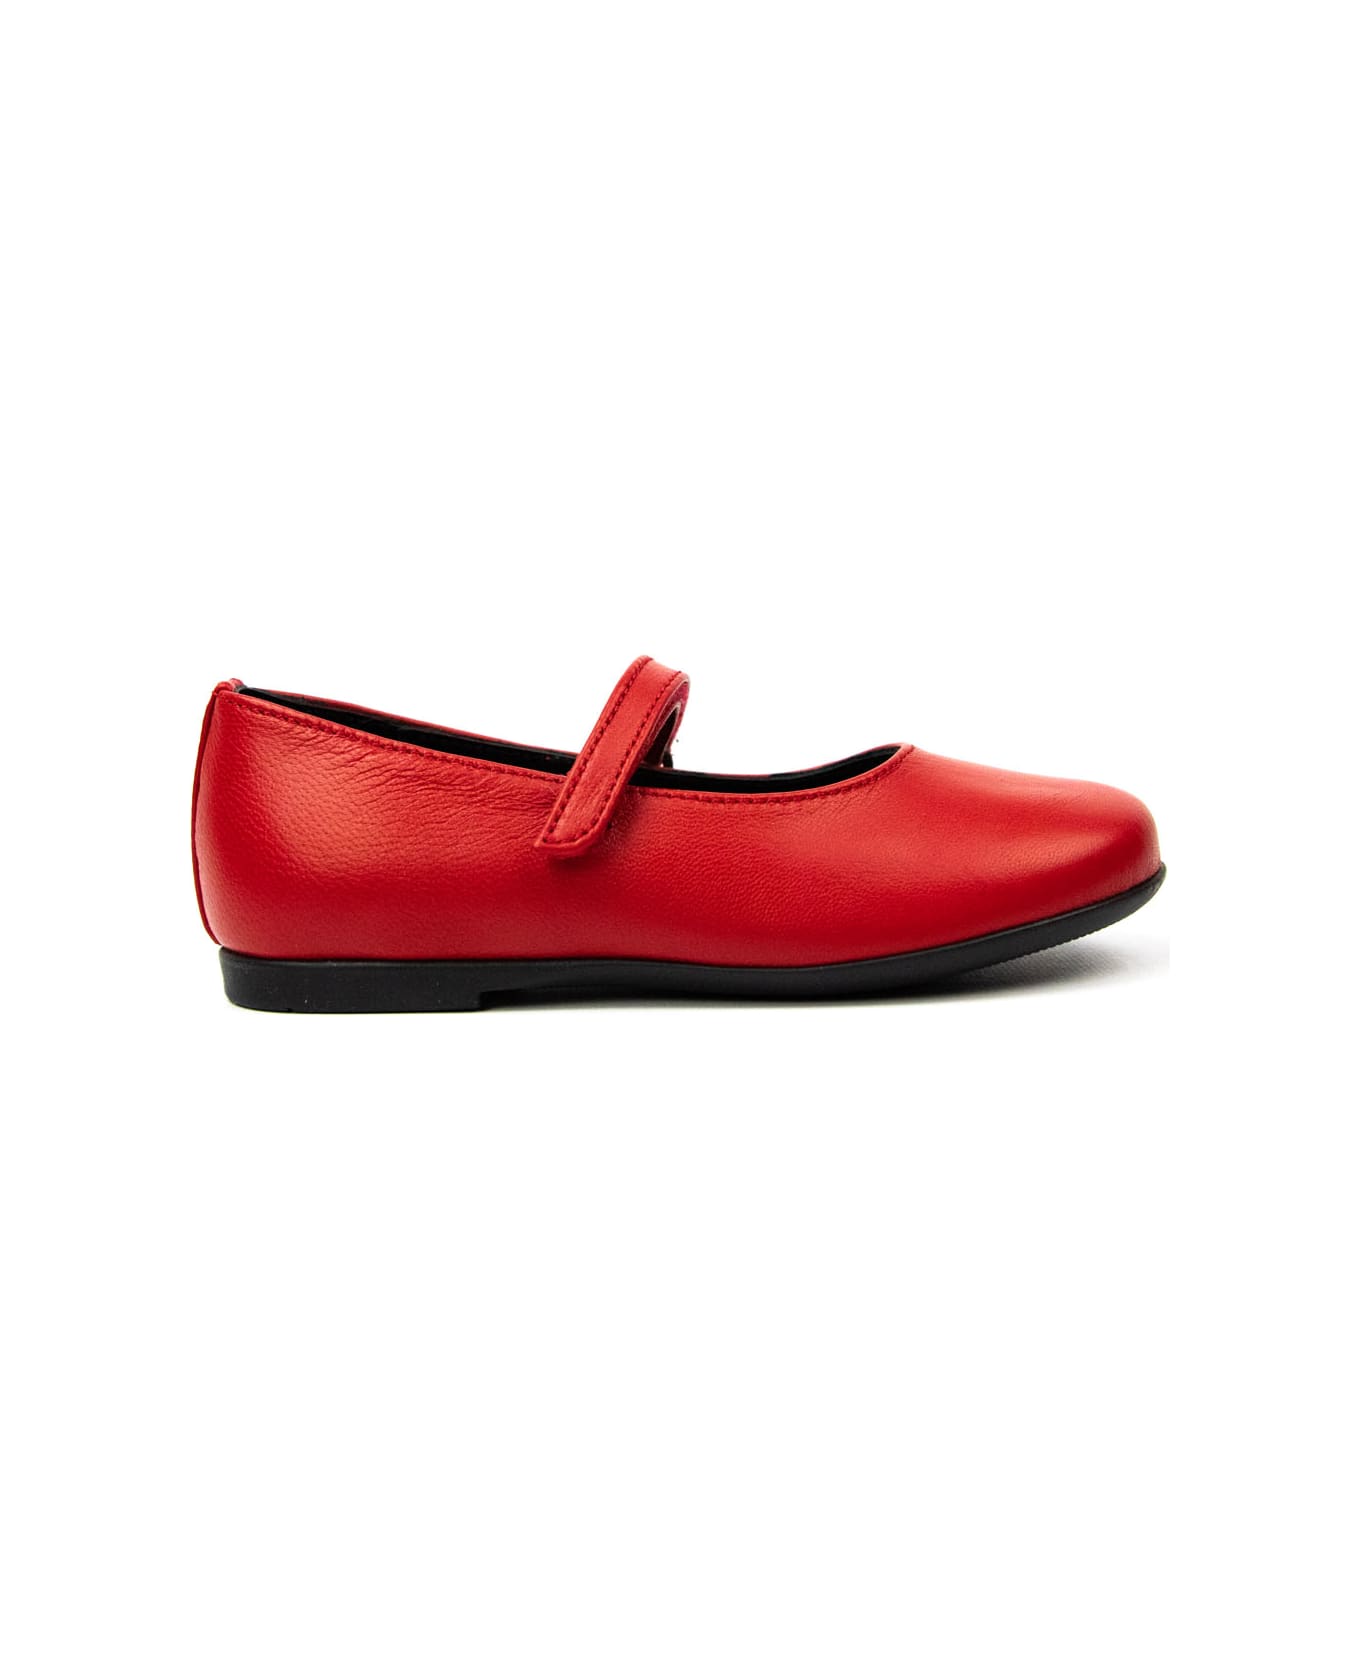 Andrea Montelpare Leather Shoes - Red